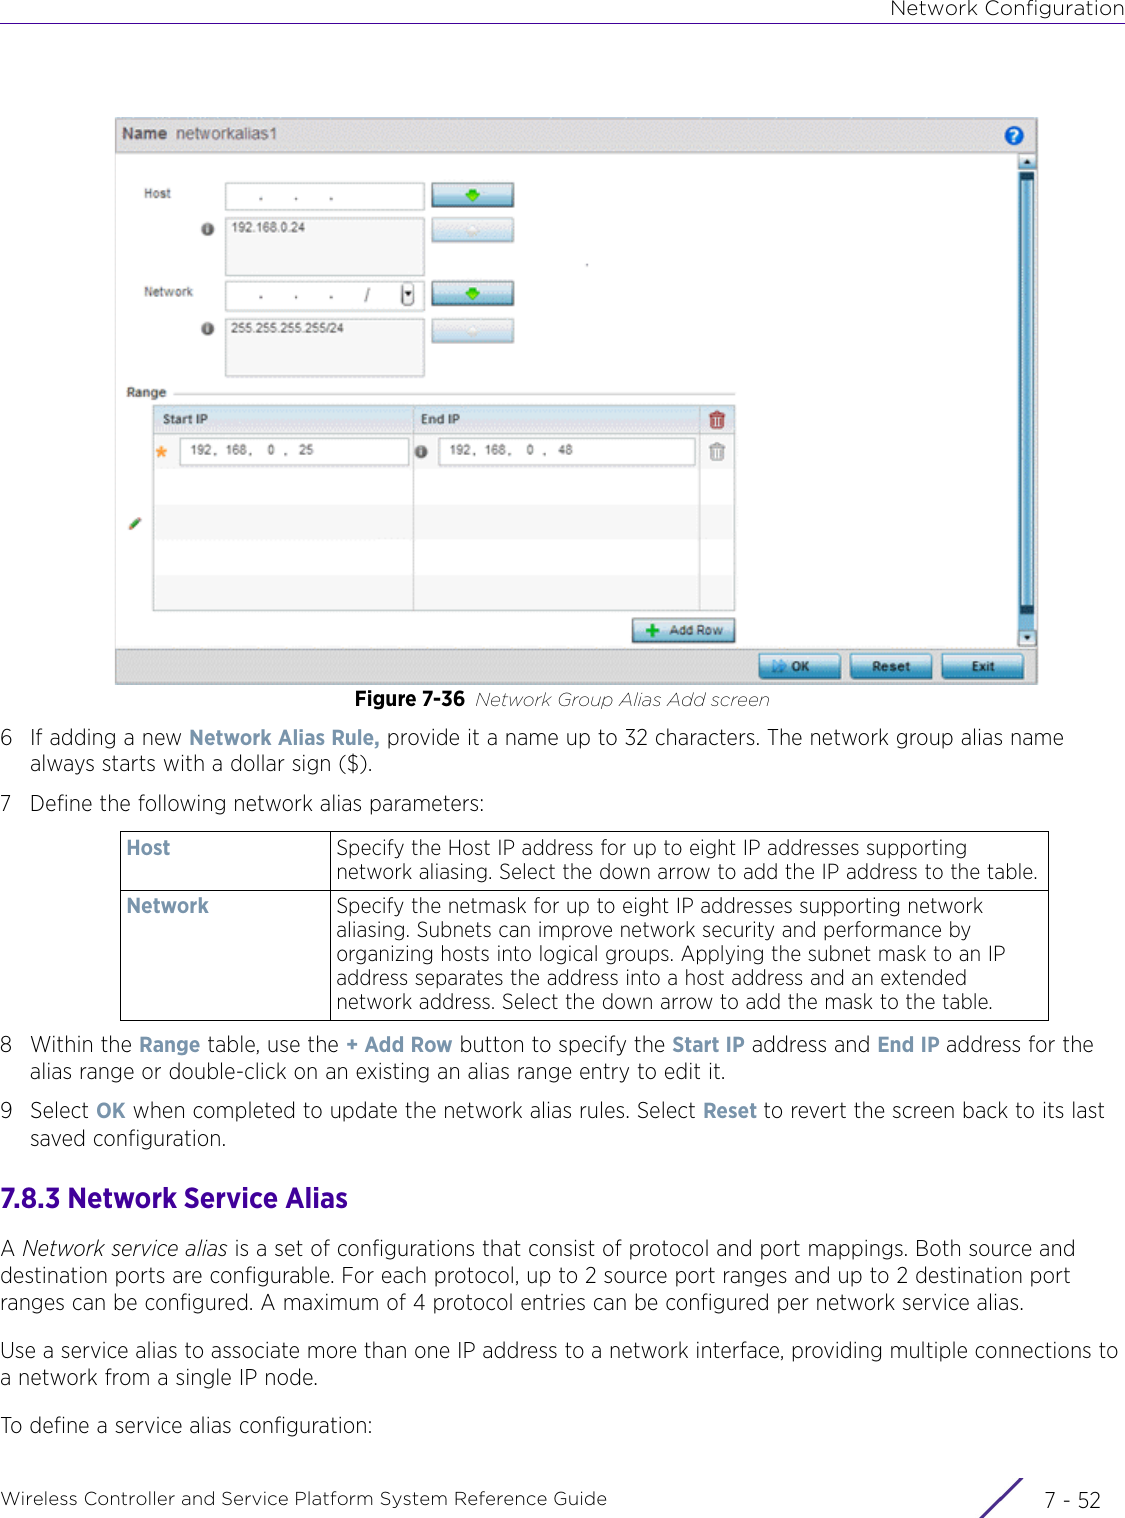 Network ConfigurationWireless Controller and Service Platform System Reference Guide  7 - 52Figure 7-36 Network Group Alias Add screen6 If adding a new Network Alias Rule, provide it a name up to 32 characters. The network group alias name always starts with a dollar sign ($).7 Define the following network alias parameters:8Within the Range table, use the + Add Row button to specify the Start IP address and End IP address for the alias range or double-click on an existing an alias range entry to edit it.9Select OK when completed to update the network alias rules. Select Reset to revert the screen back to its last saved configuration.7.8.3 Network Service AliasA Network service alias is a set of configurations that consist of protocol and port mappings. Both source and destination ports are configurable. For each protocol, up to 2 source port ranges and up to 2 destination port ranges can be configured. A maximum of 4 protocol entries can be configured per network service alias.Use a service alias to associate more than one IP address to a network interface, providing multiple connections to a network from a single IP node.To define a service alias configuration:Host  Specify the Host IP address for up to eight IP addresses supporting network aliasing. Select the down arrow to add the IP address to the table.Network Specify the netmask for up to eight IP addresses supporting network aliasing. Subnets can improve network security and performance by organizing hosts into logical groups. Applying the subnet mask to an IP address separates the address into a host address and an extended network address. Select the down arrow to add the mask to the table.